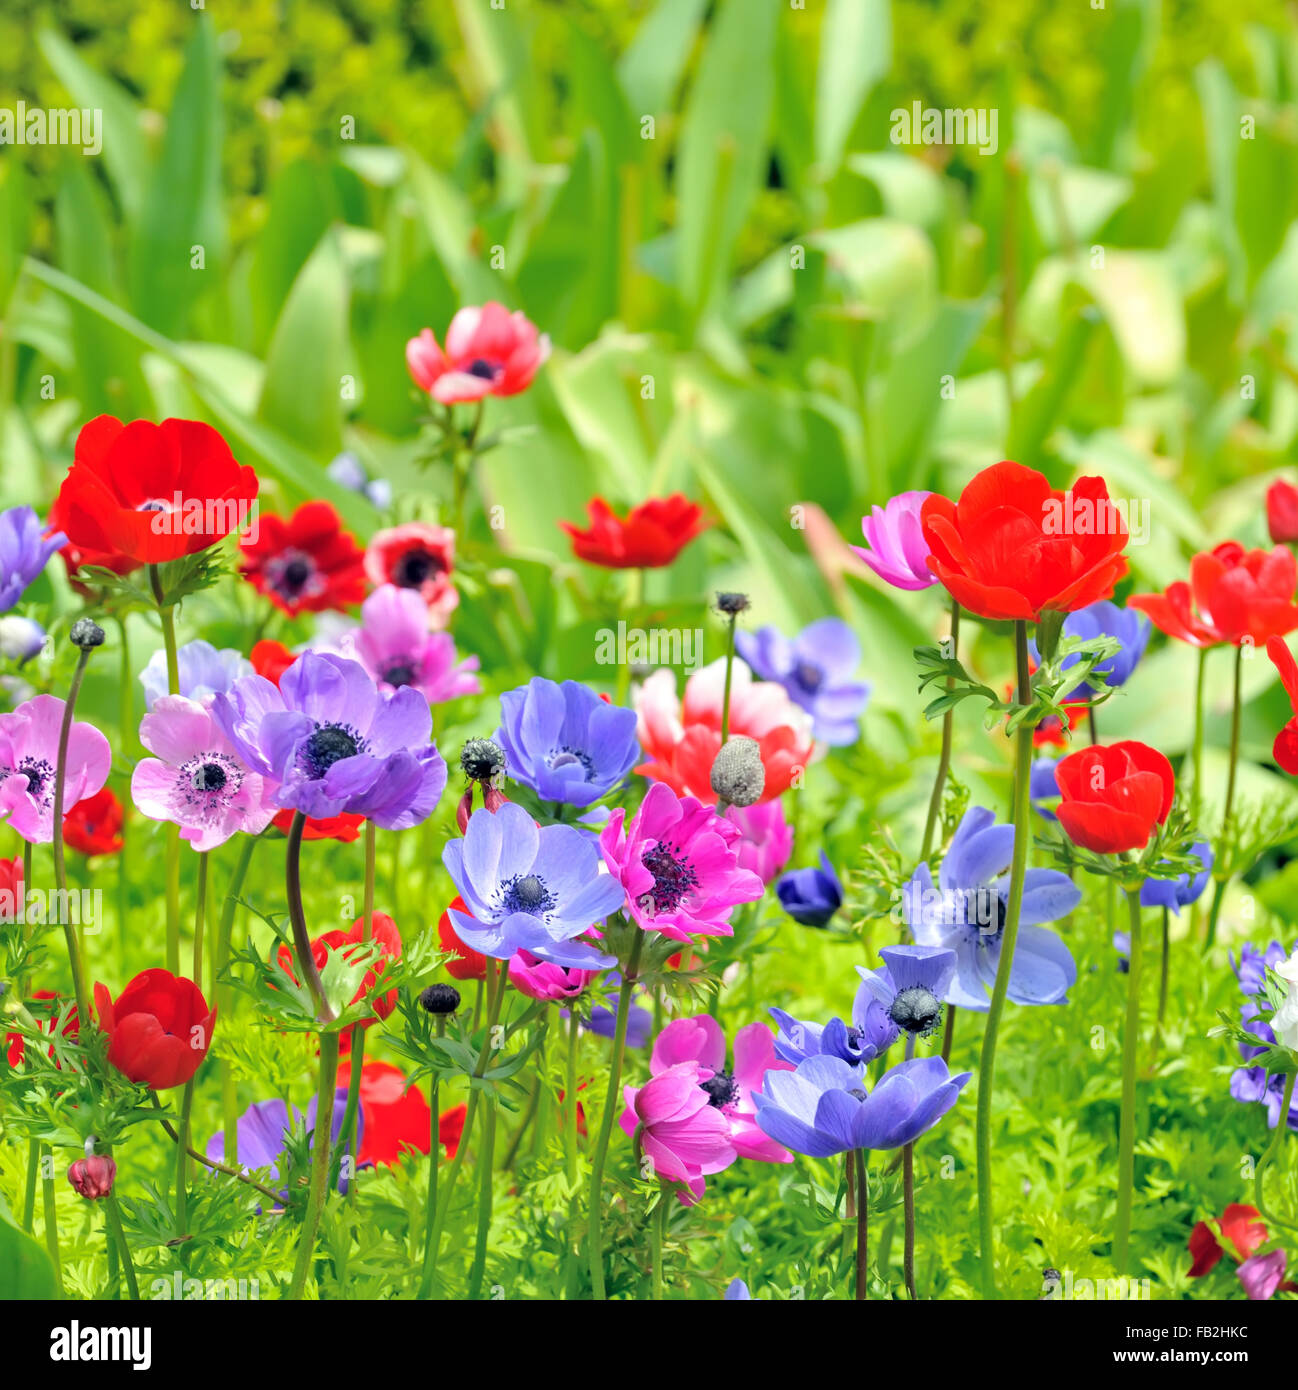 Anemone flowers on field in spring time Stock Photo